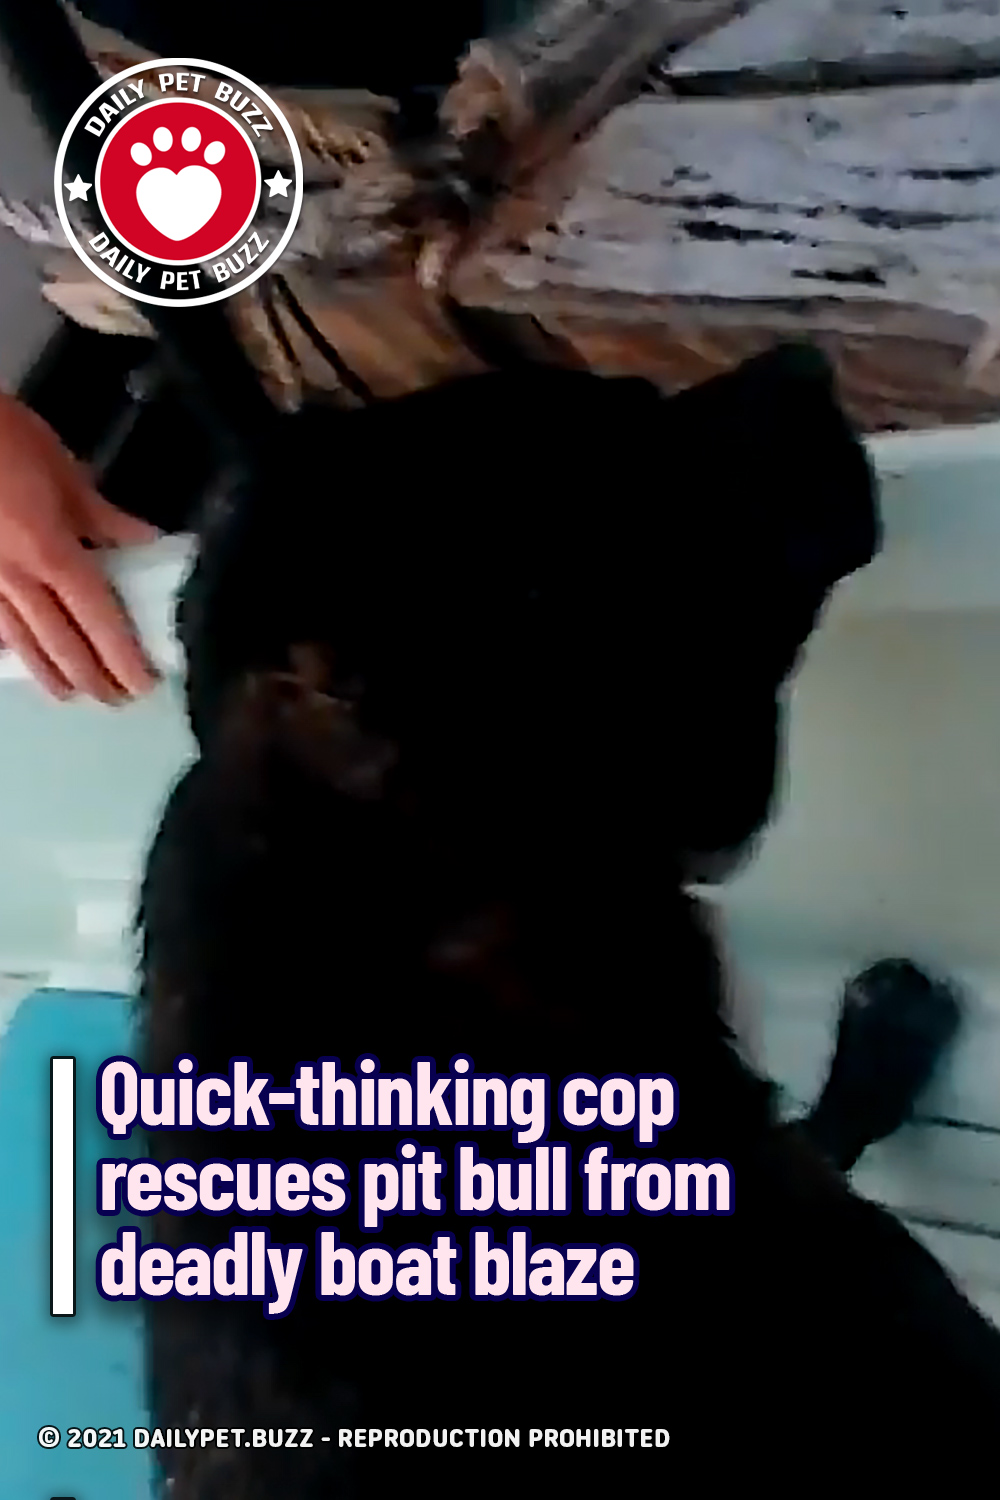 Quick-thinking cop rescues pit bull from deadly boat blaze